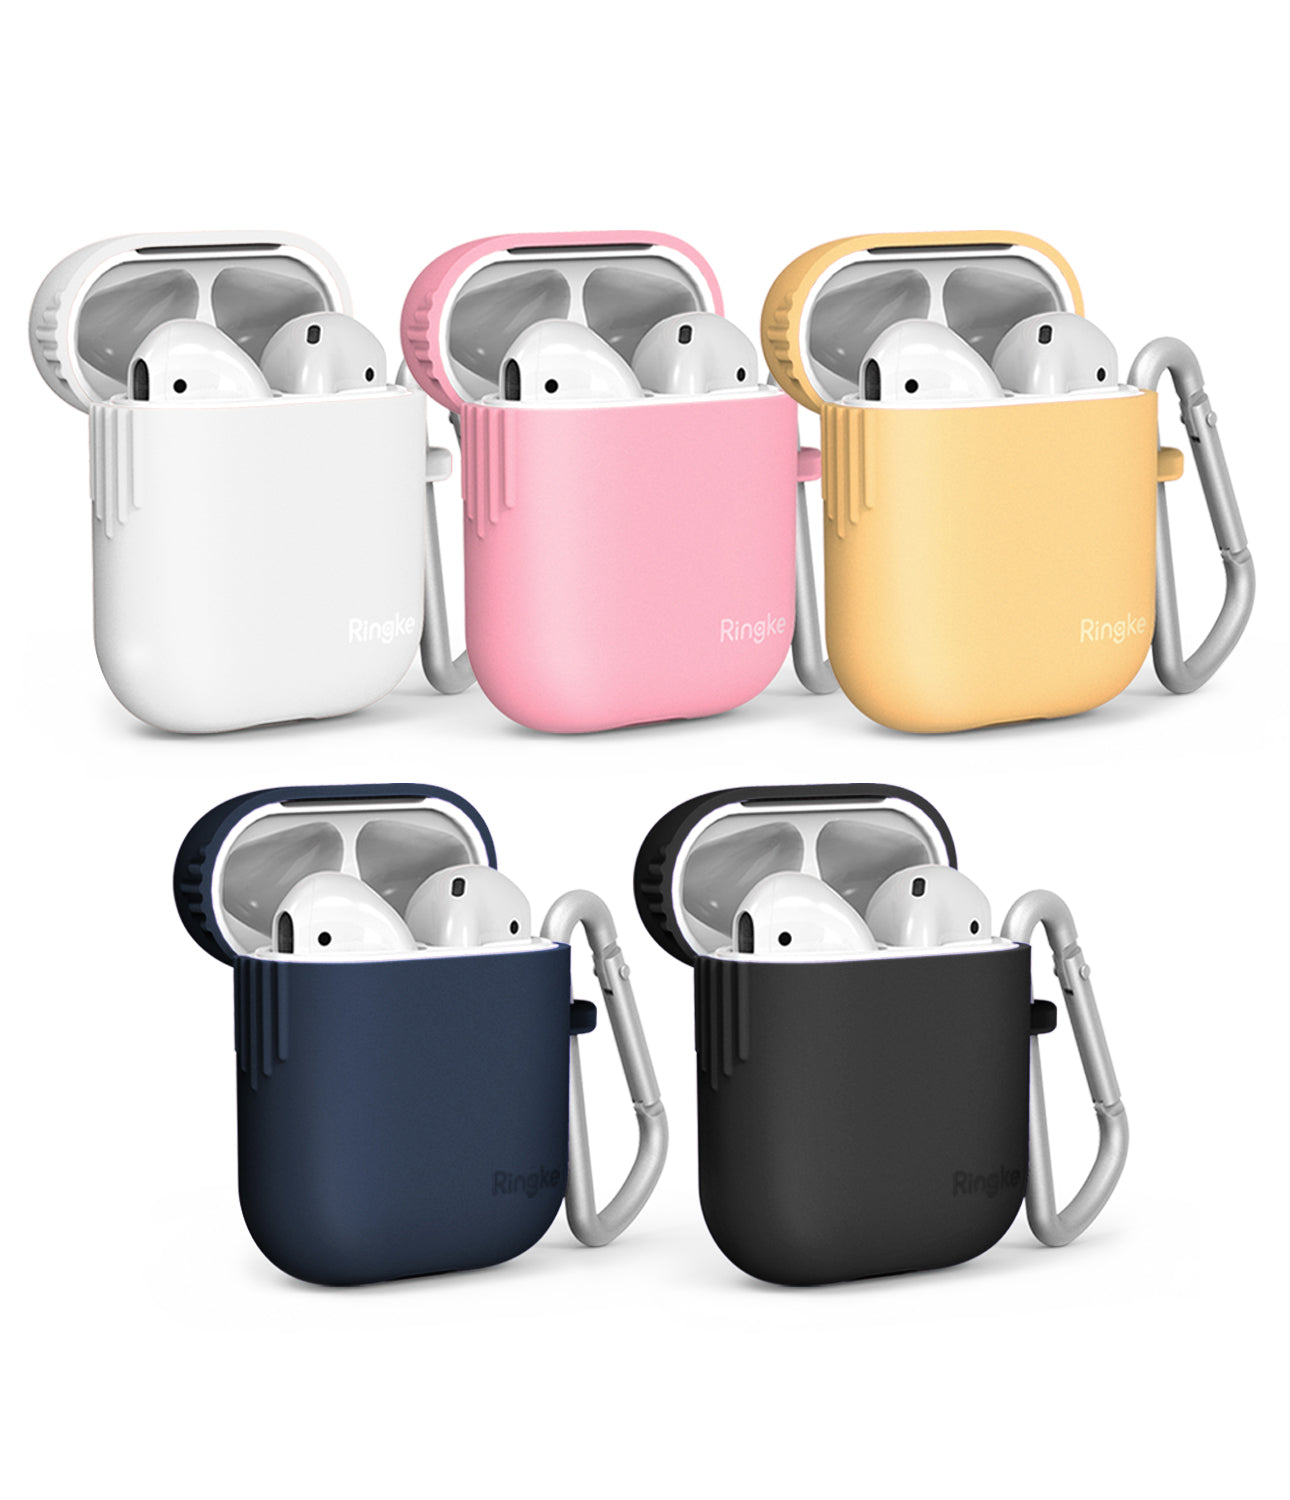 apple airpods 1 2 ringke silicone tpu case